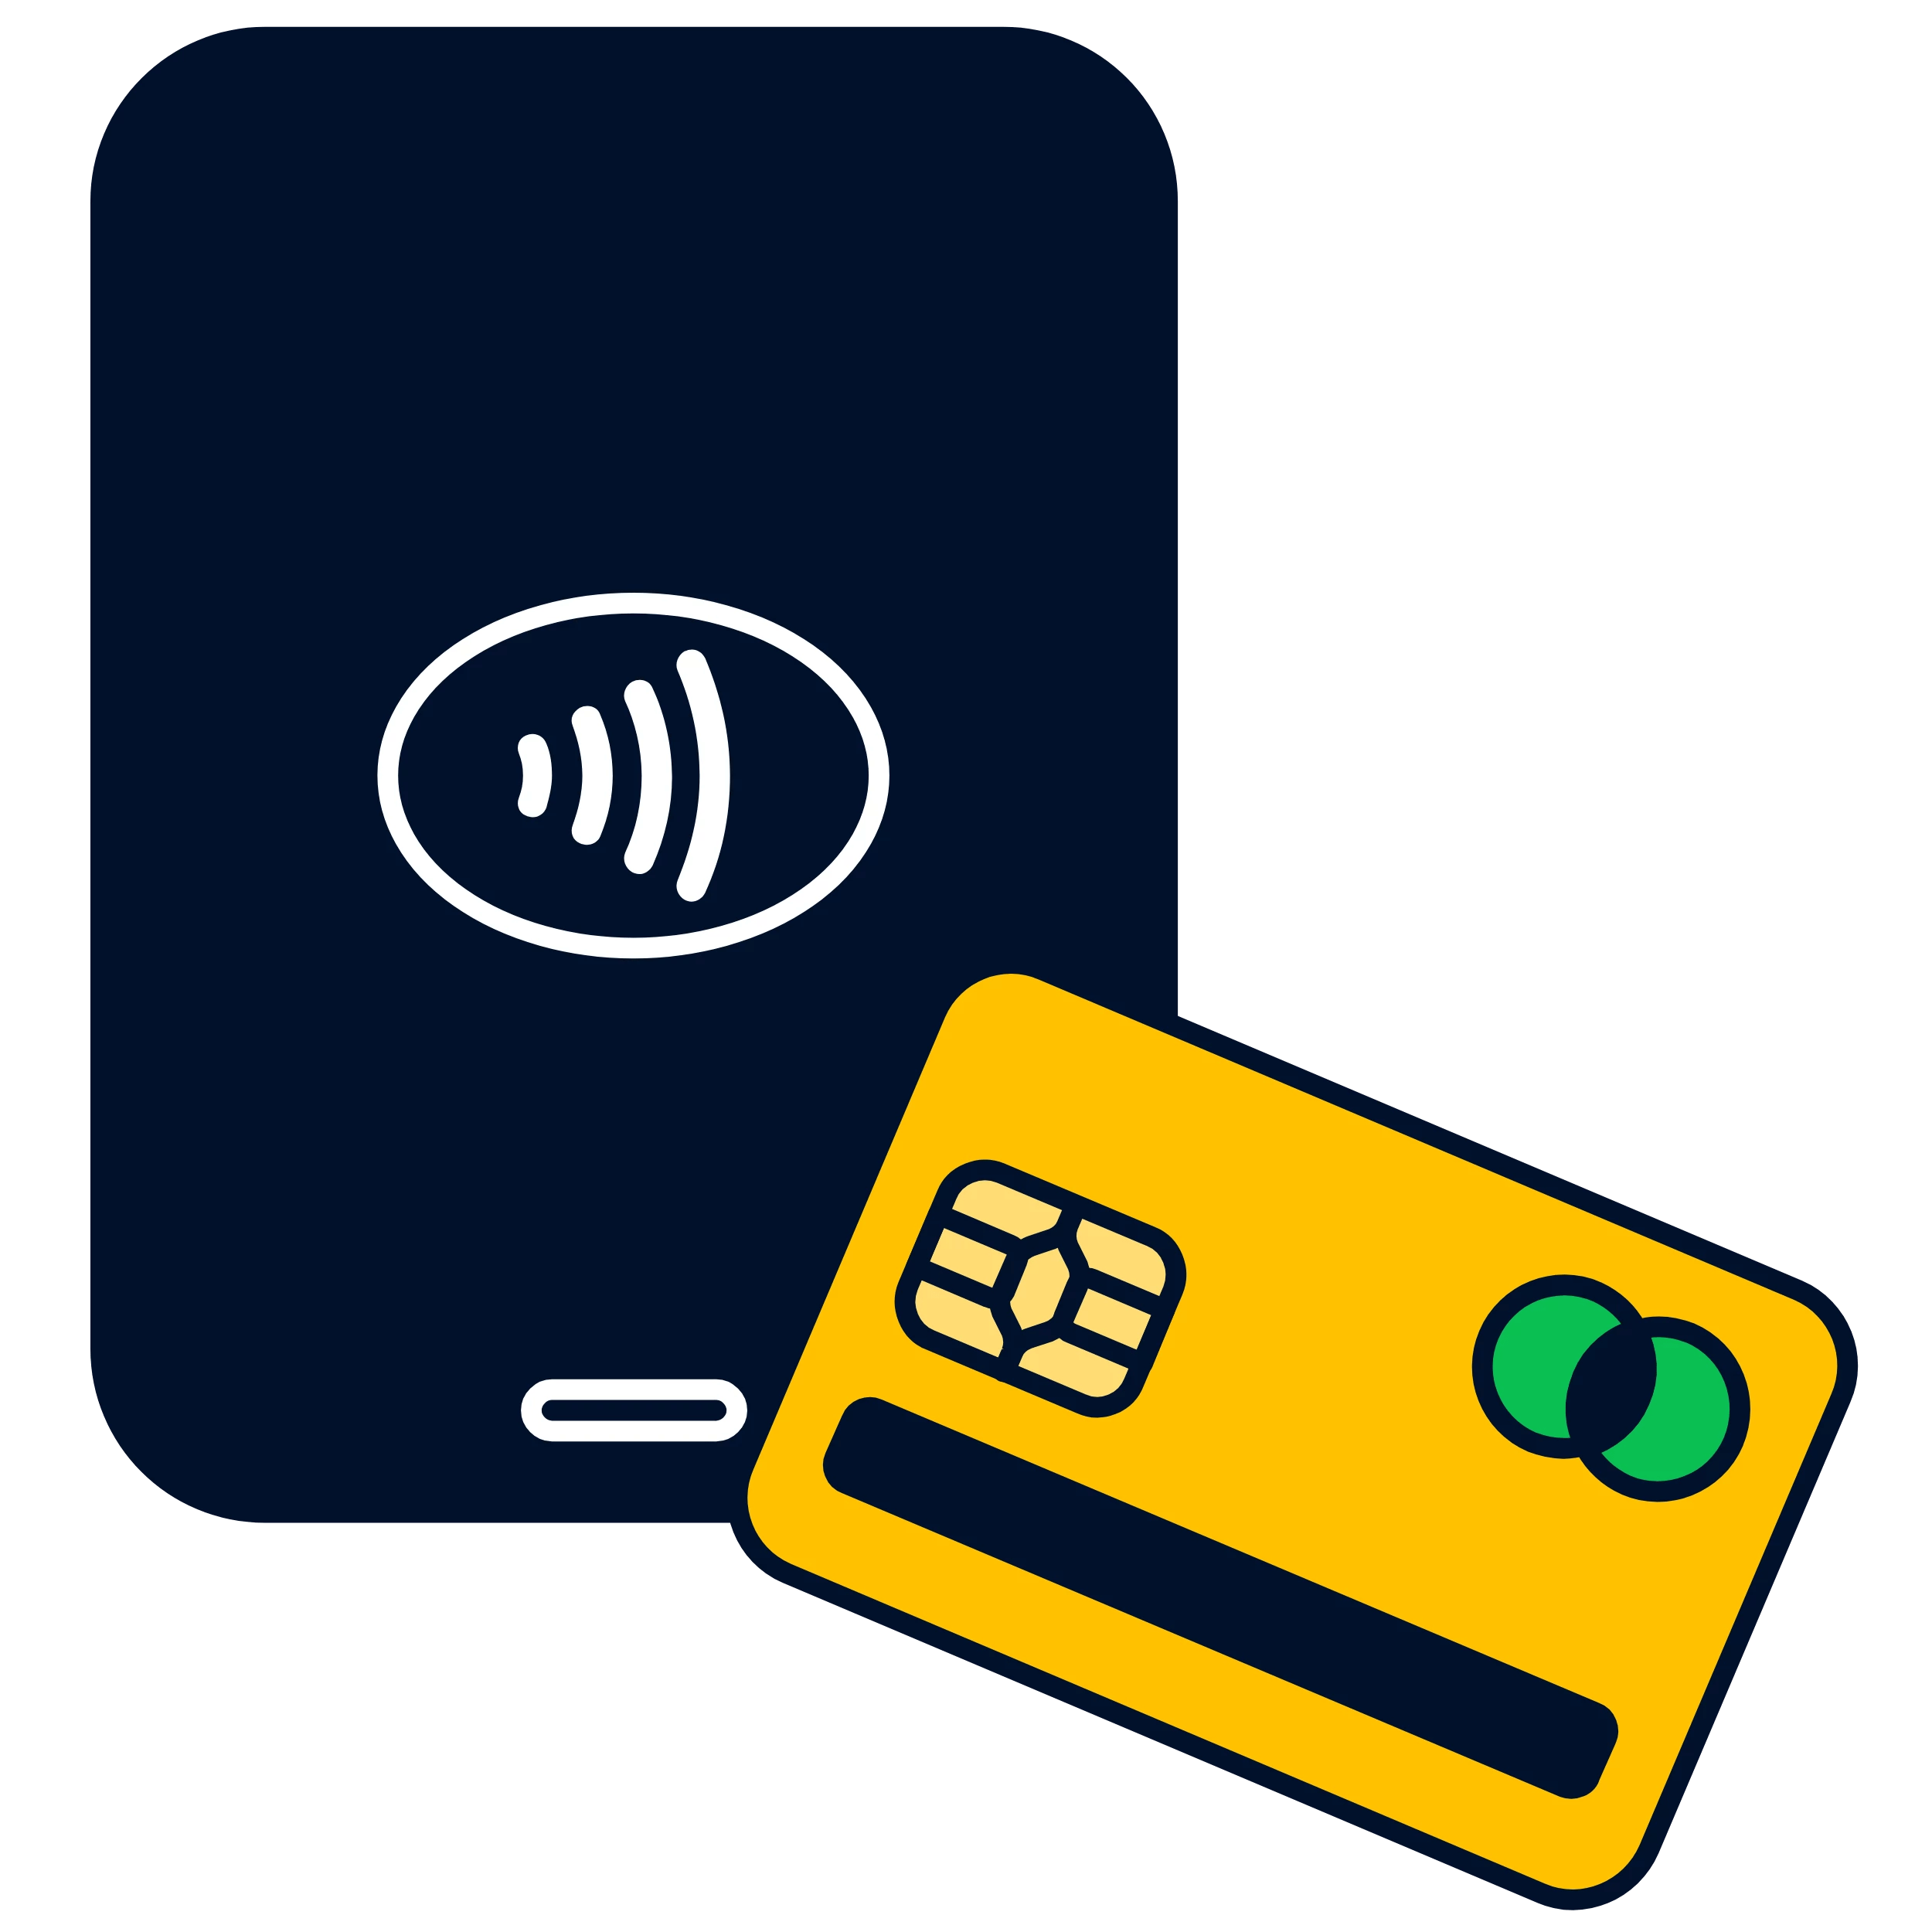 A card reader and a yellow credit card to demonstrate the phone terminals